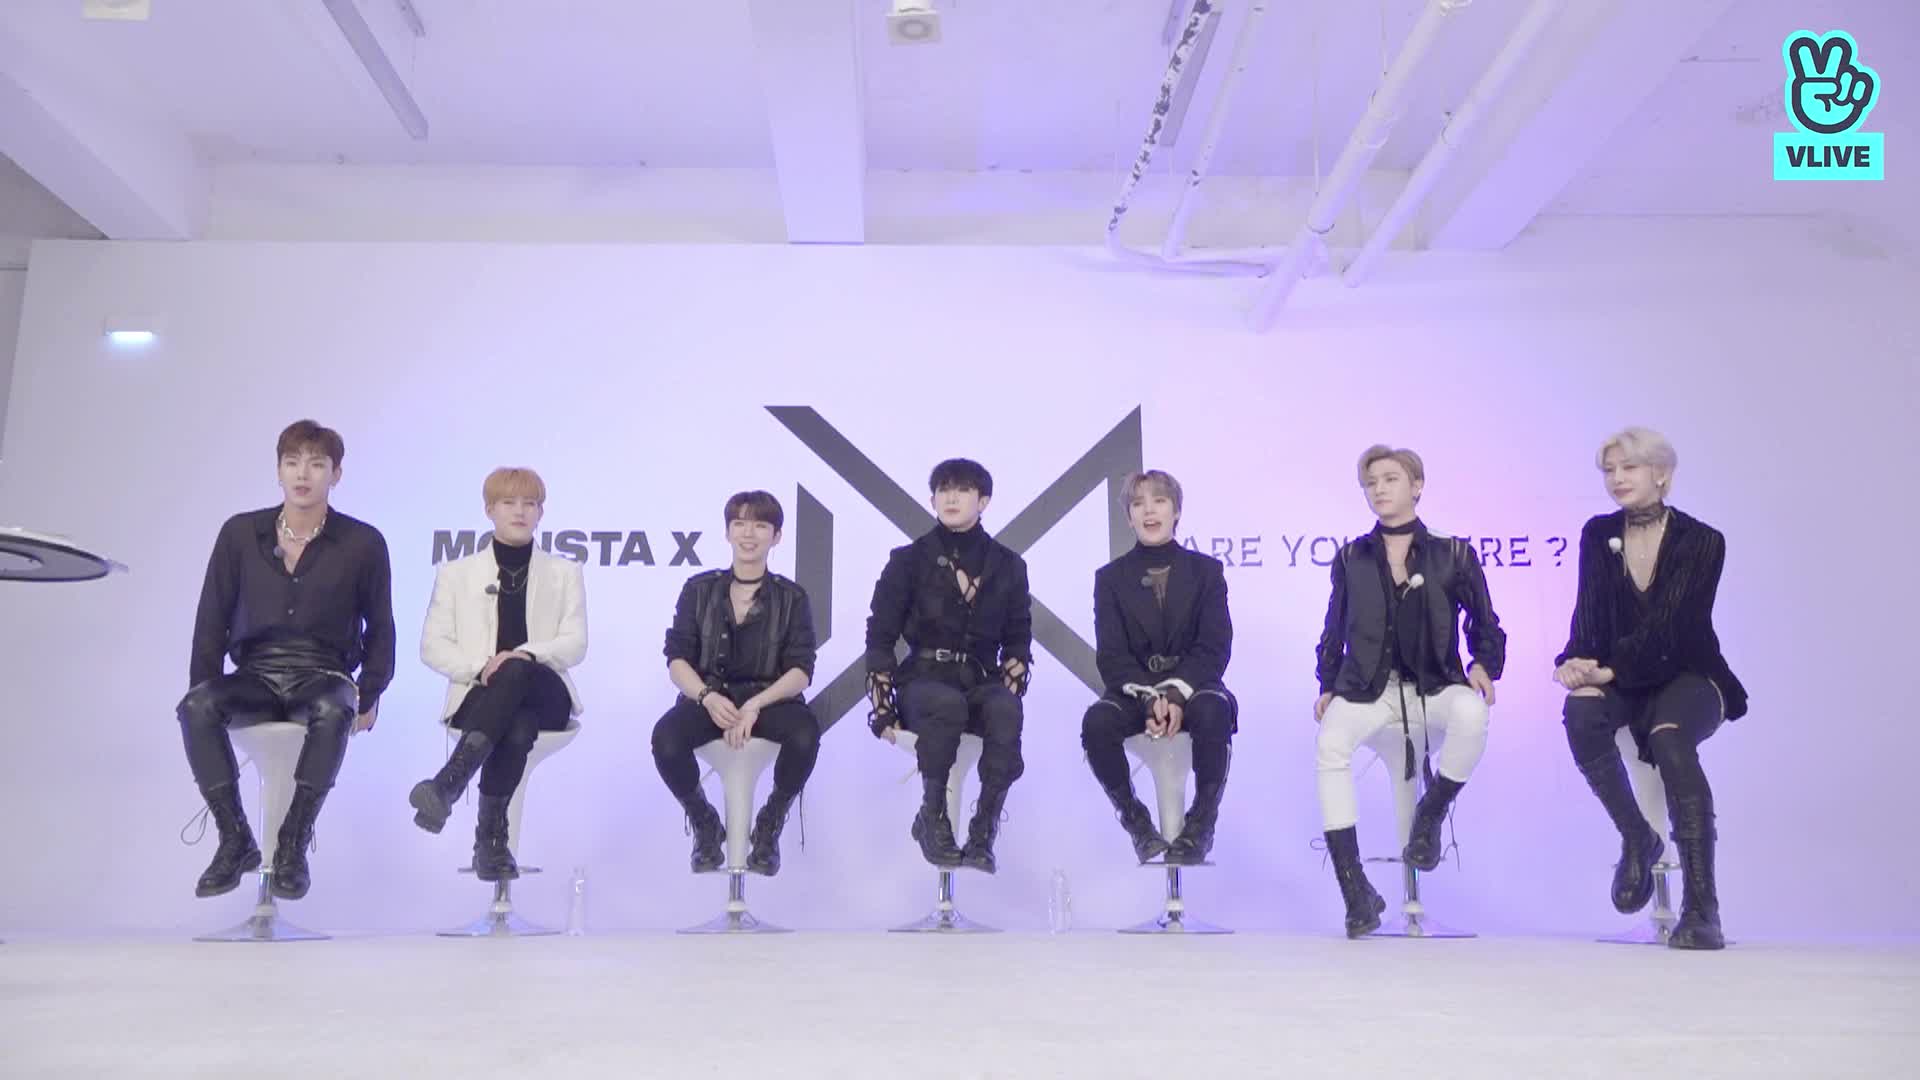 [Replay] MONSTA X COMEBACK VLIVE "ARE YOU THERE"